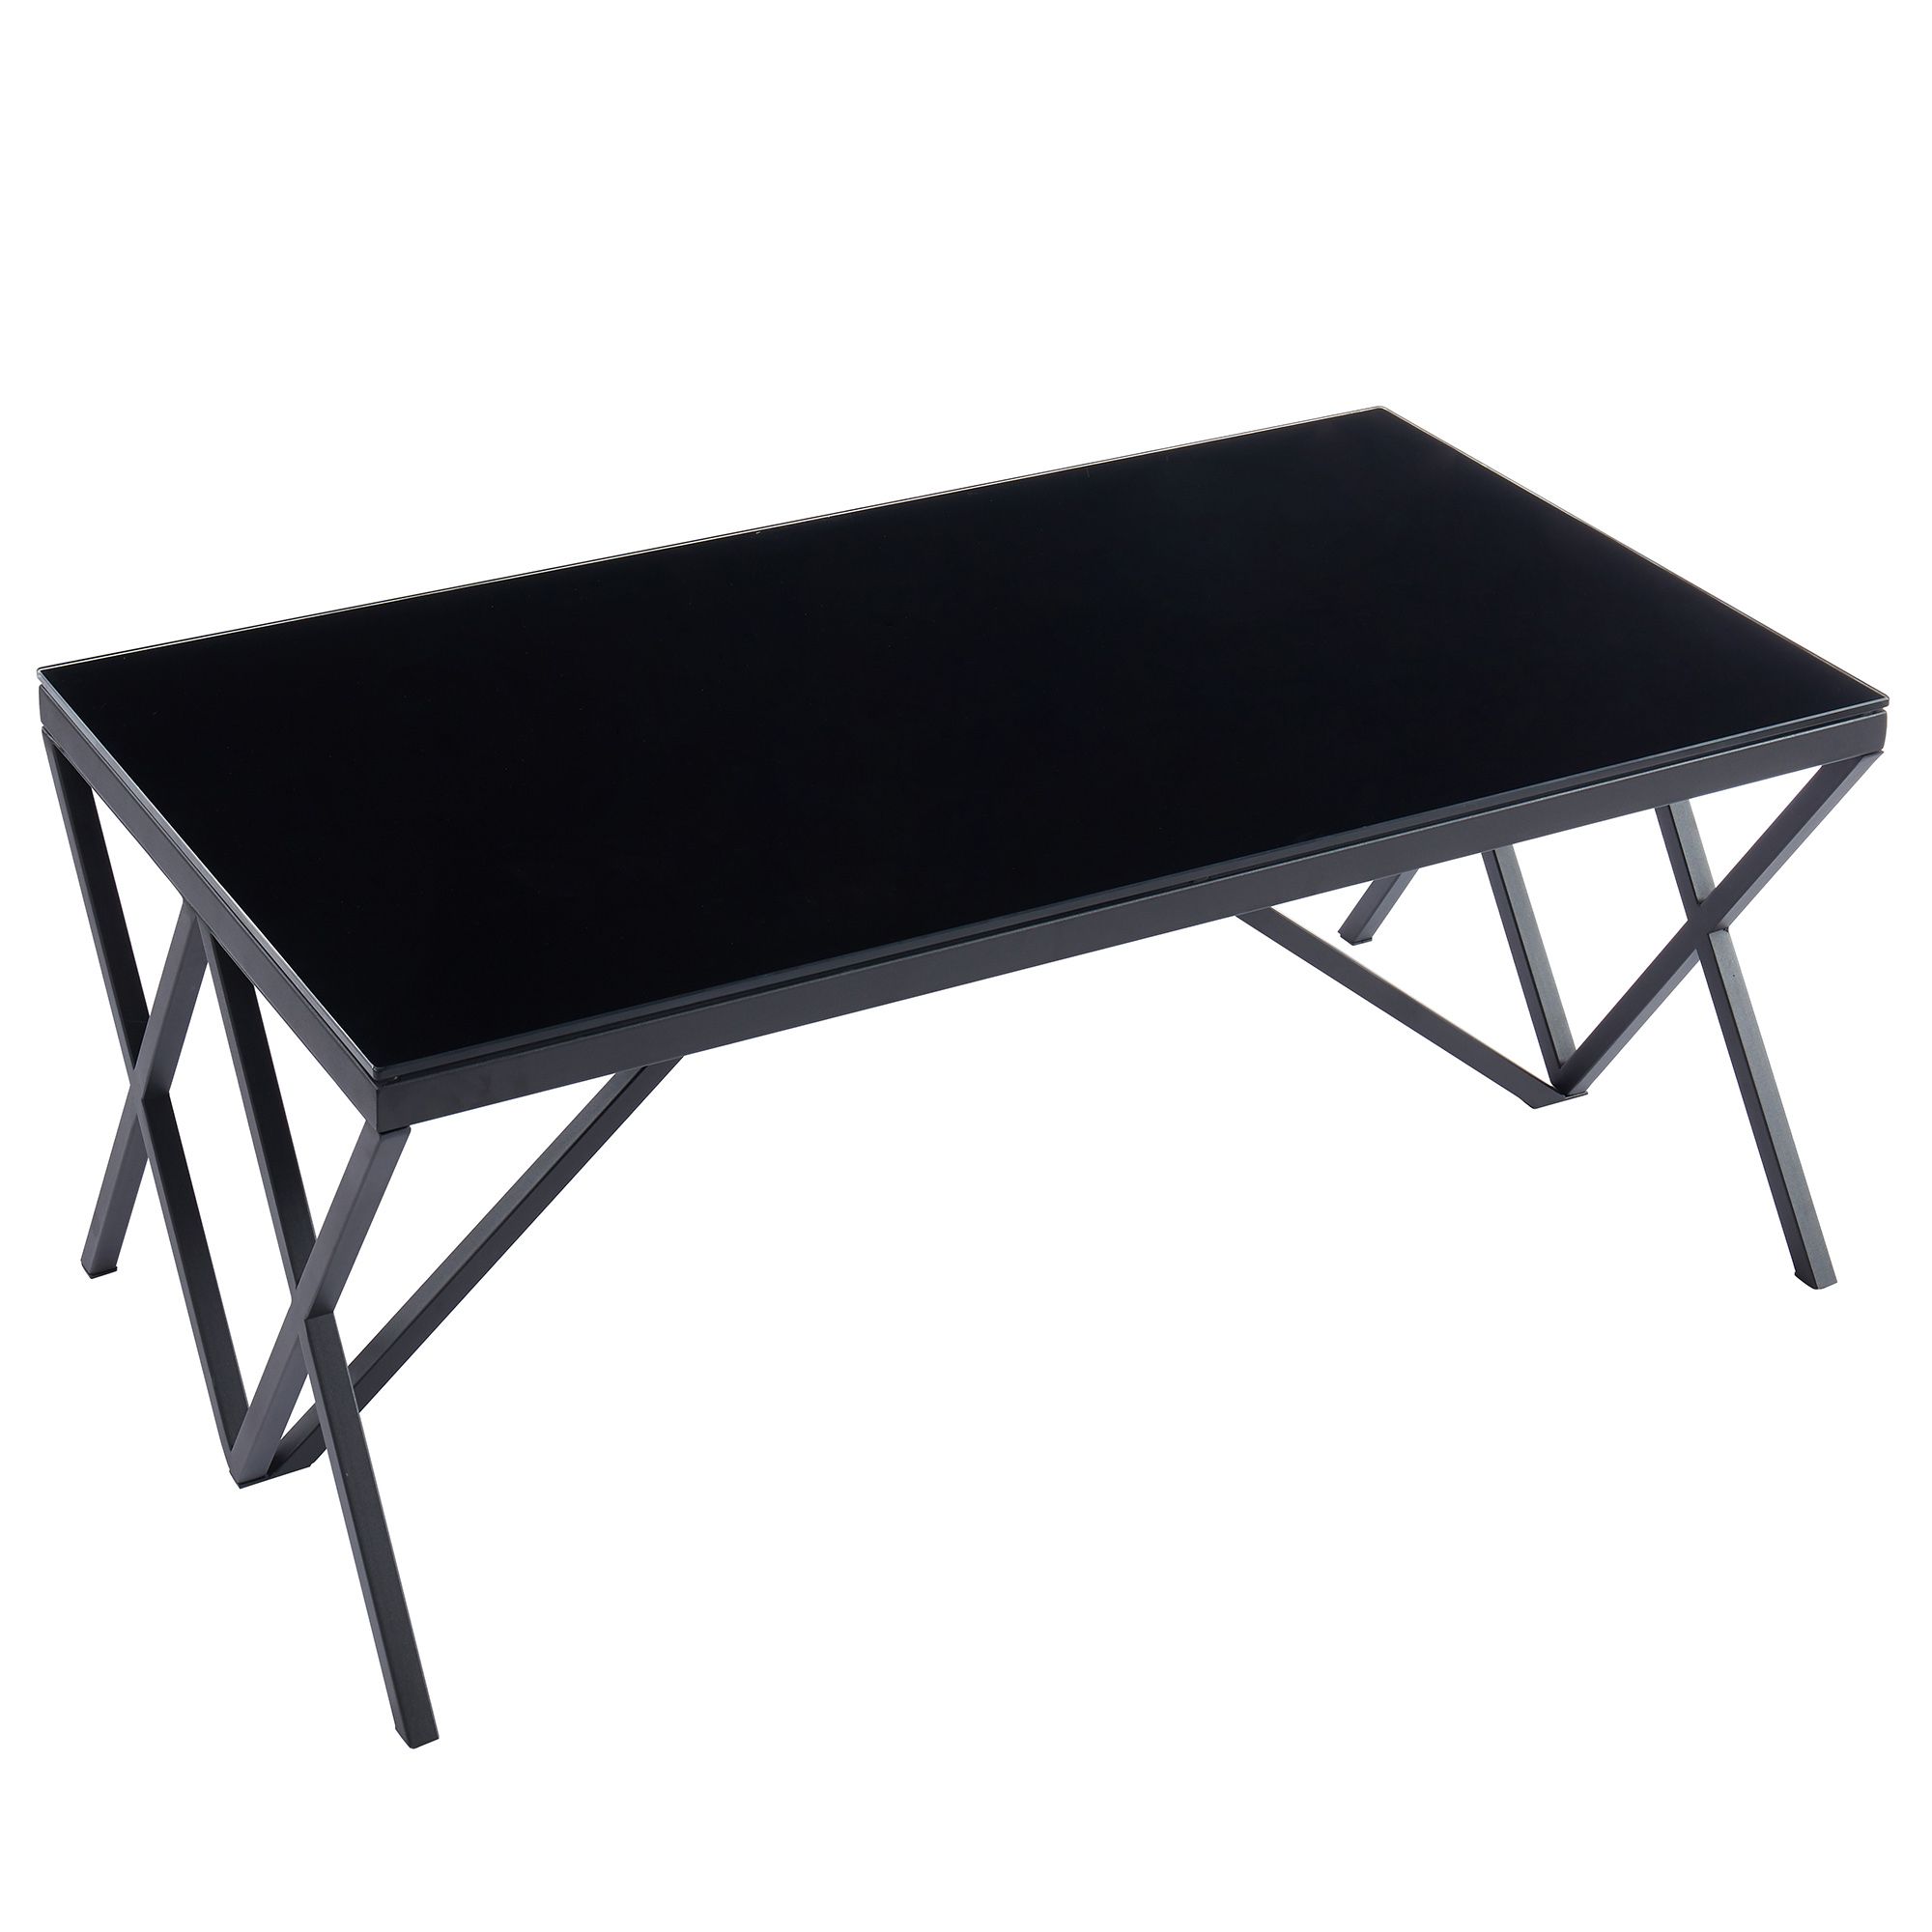 Calix Coffee Table In Black – Aux Merveilles Pertaining To Addison&amp;lane Calix Square Tables (View 19 of 20)